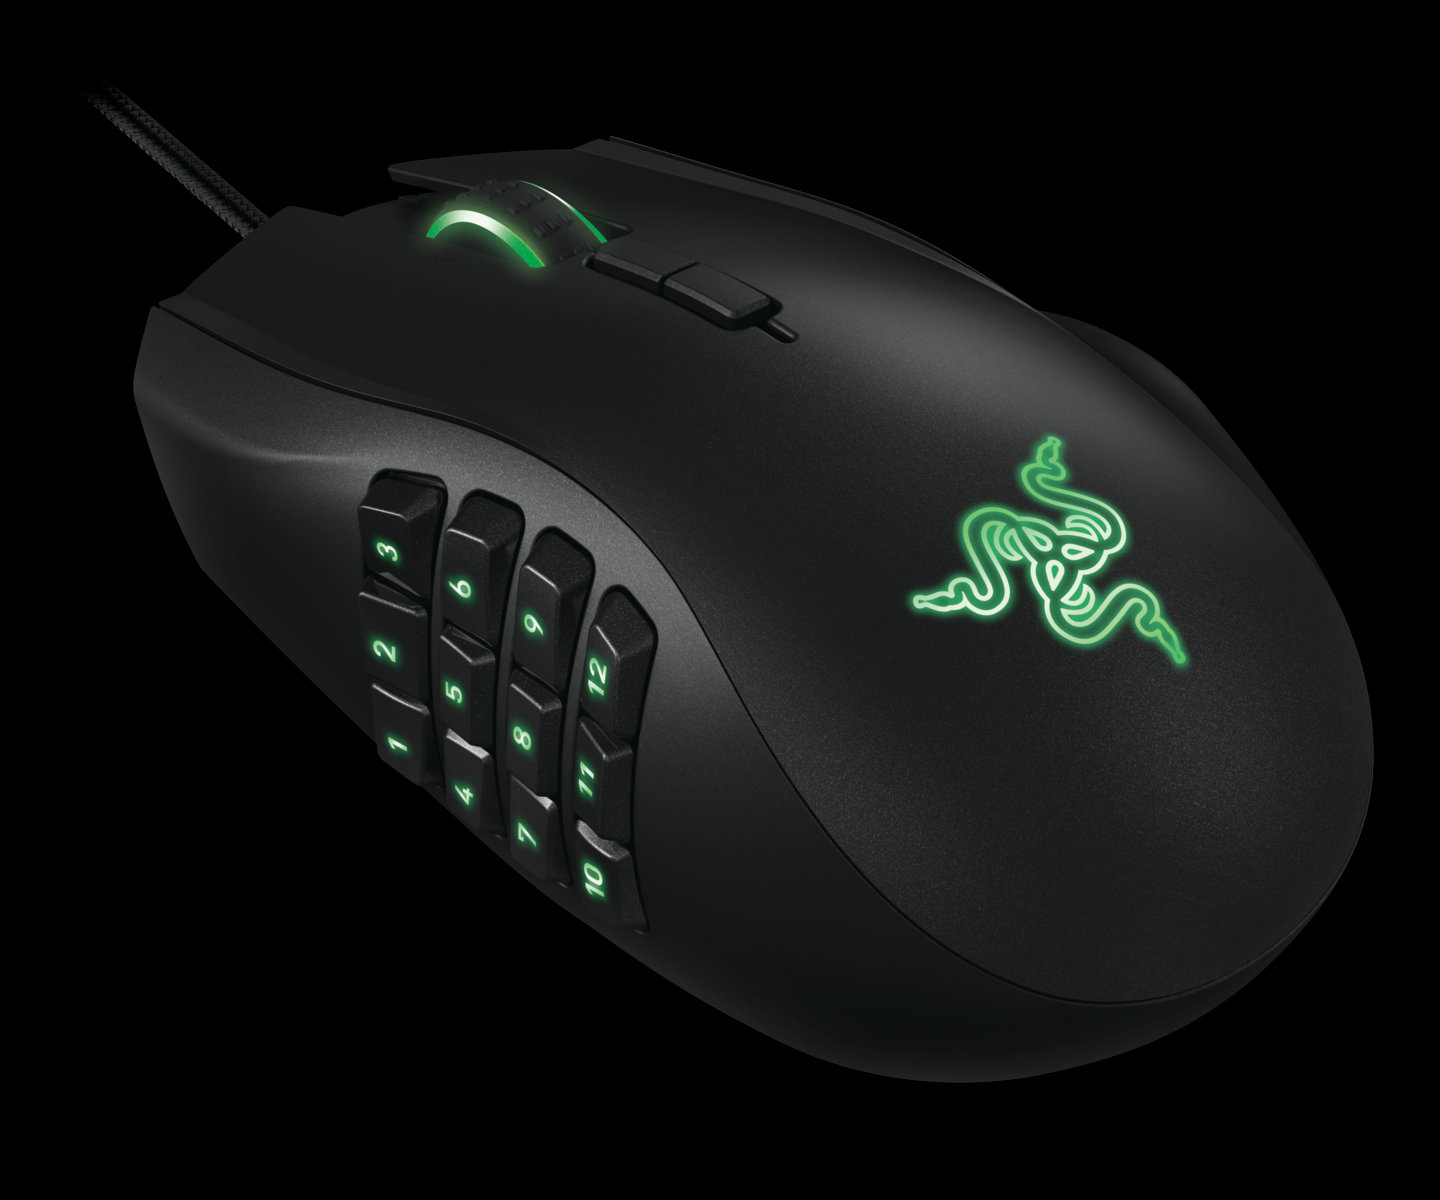 Razer Improves Naga MMO Gaming Mouse with 2014 Edition | Custom PC Review